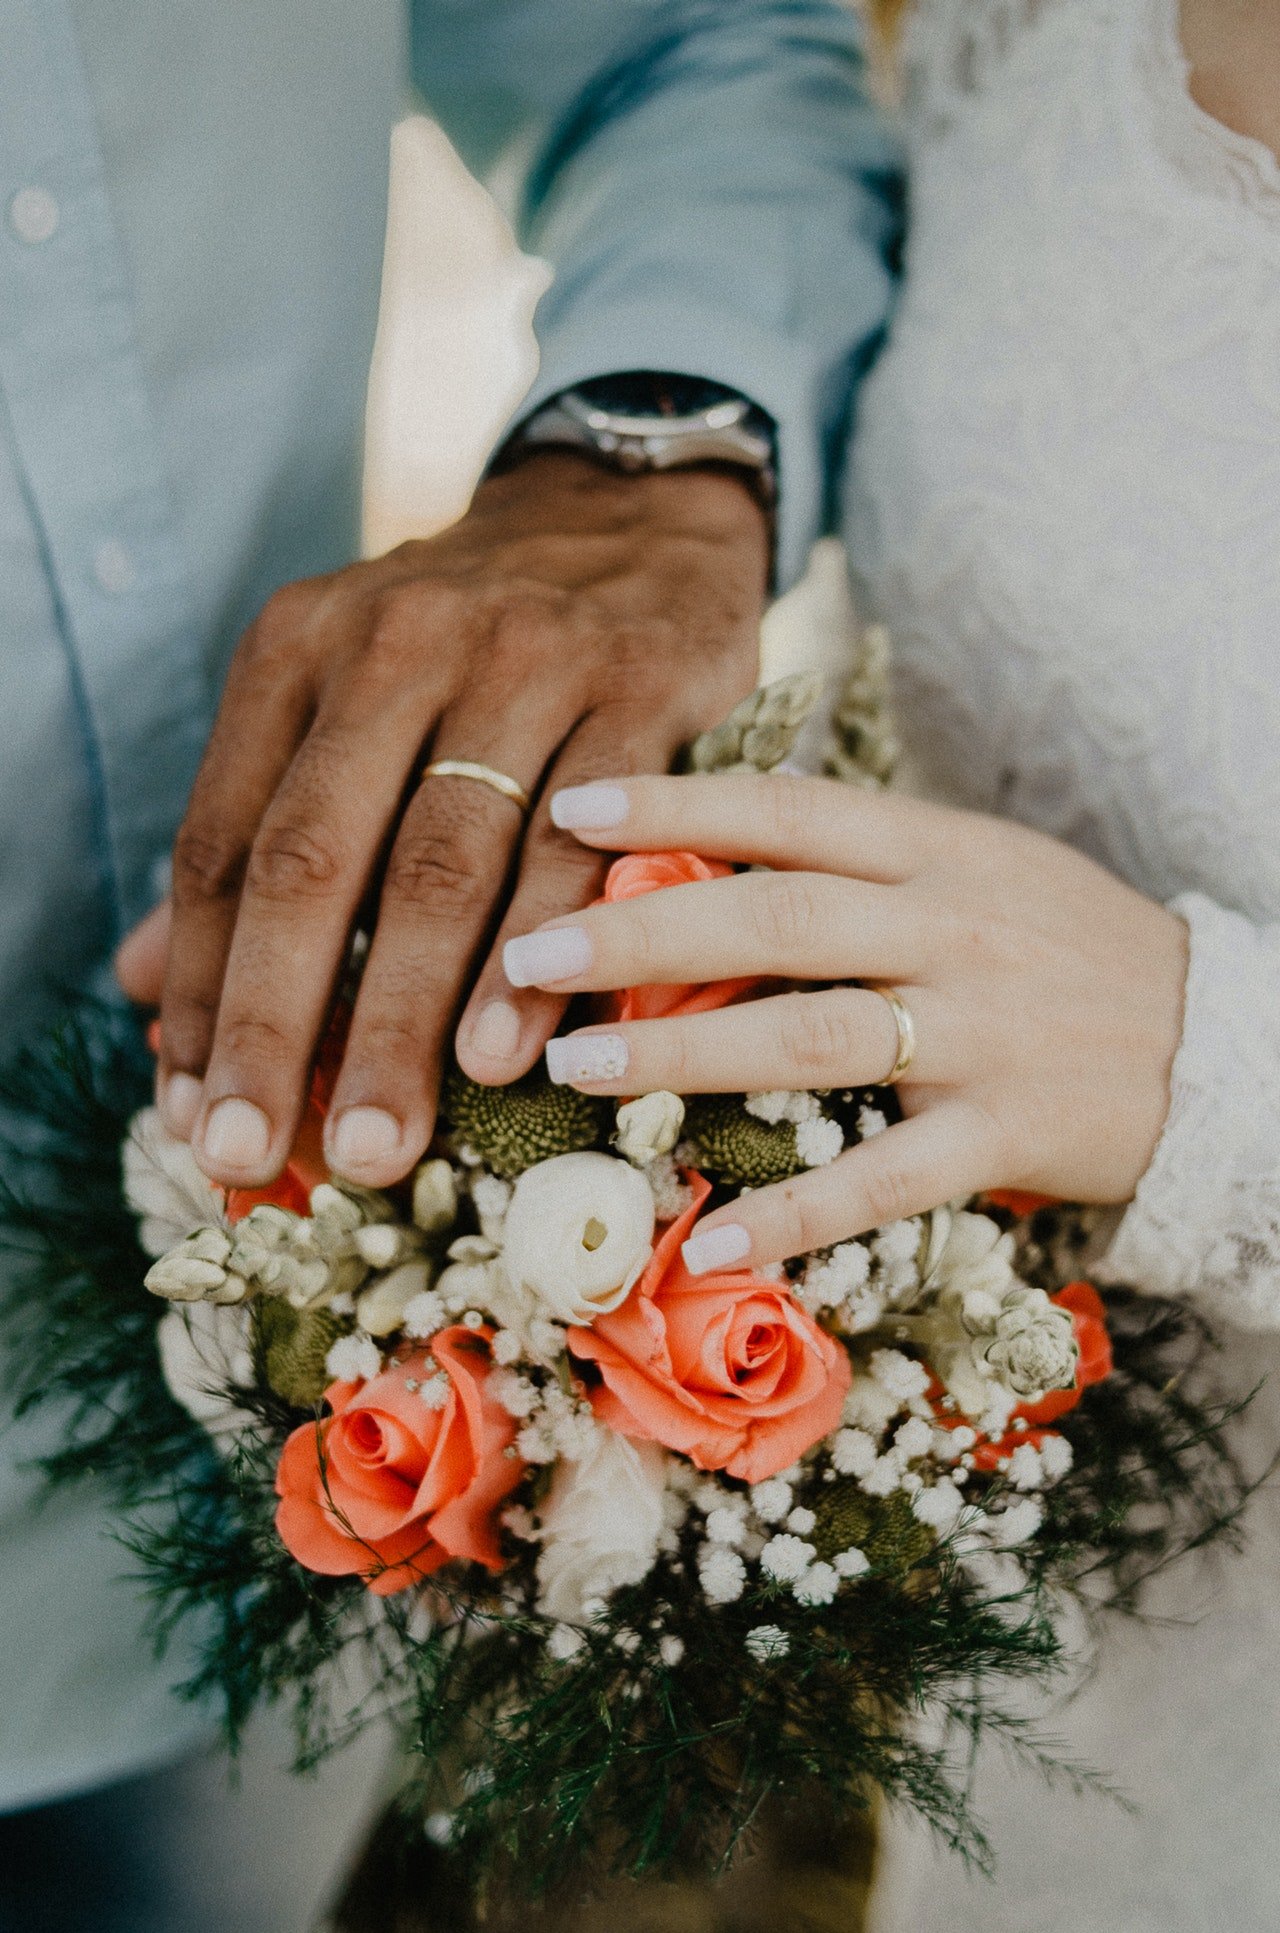 Man and woman's hands on top of flower bouquet | Source: Pexels